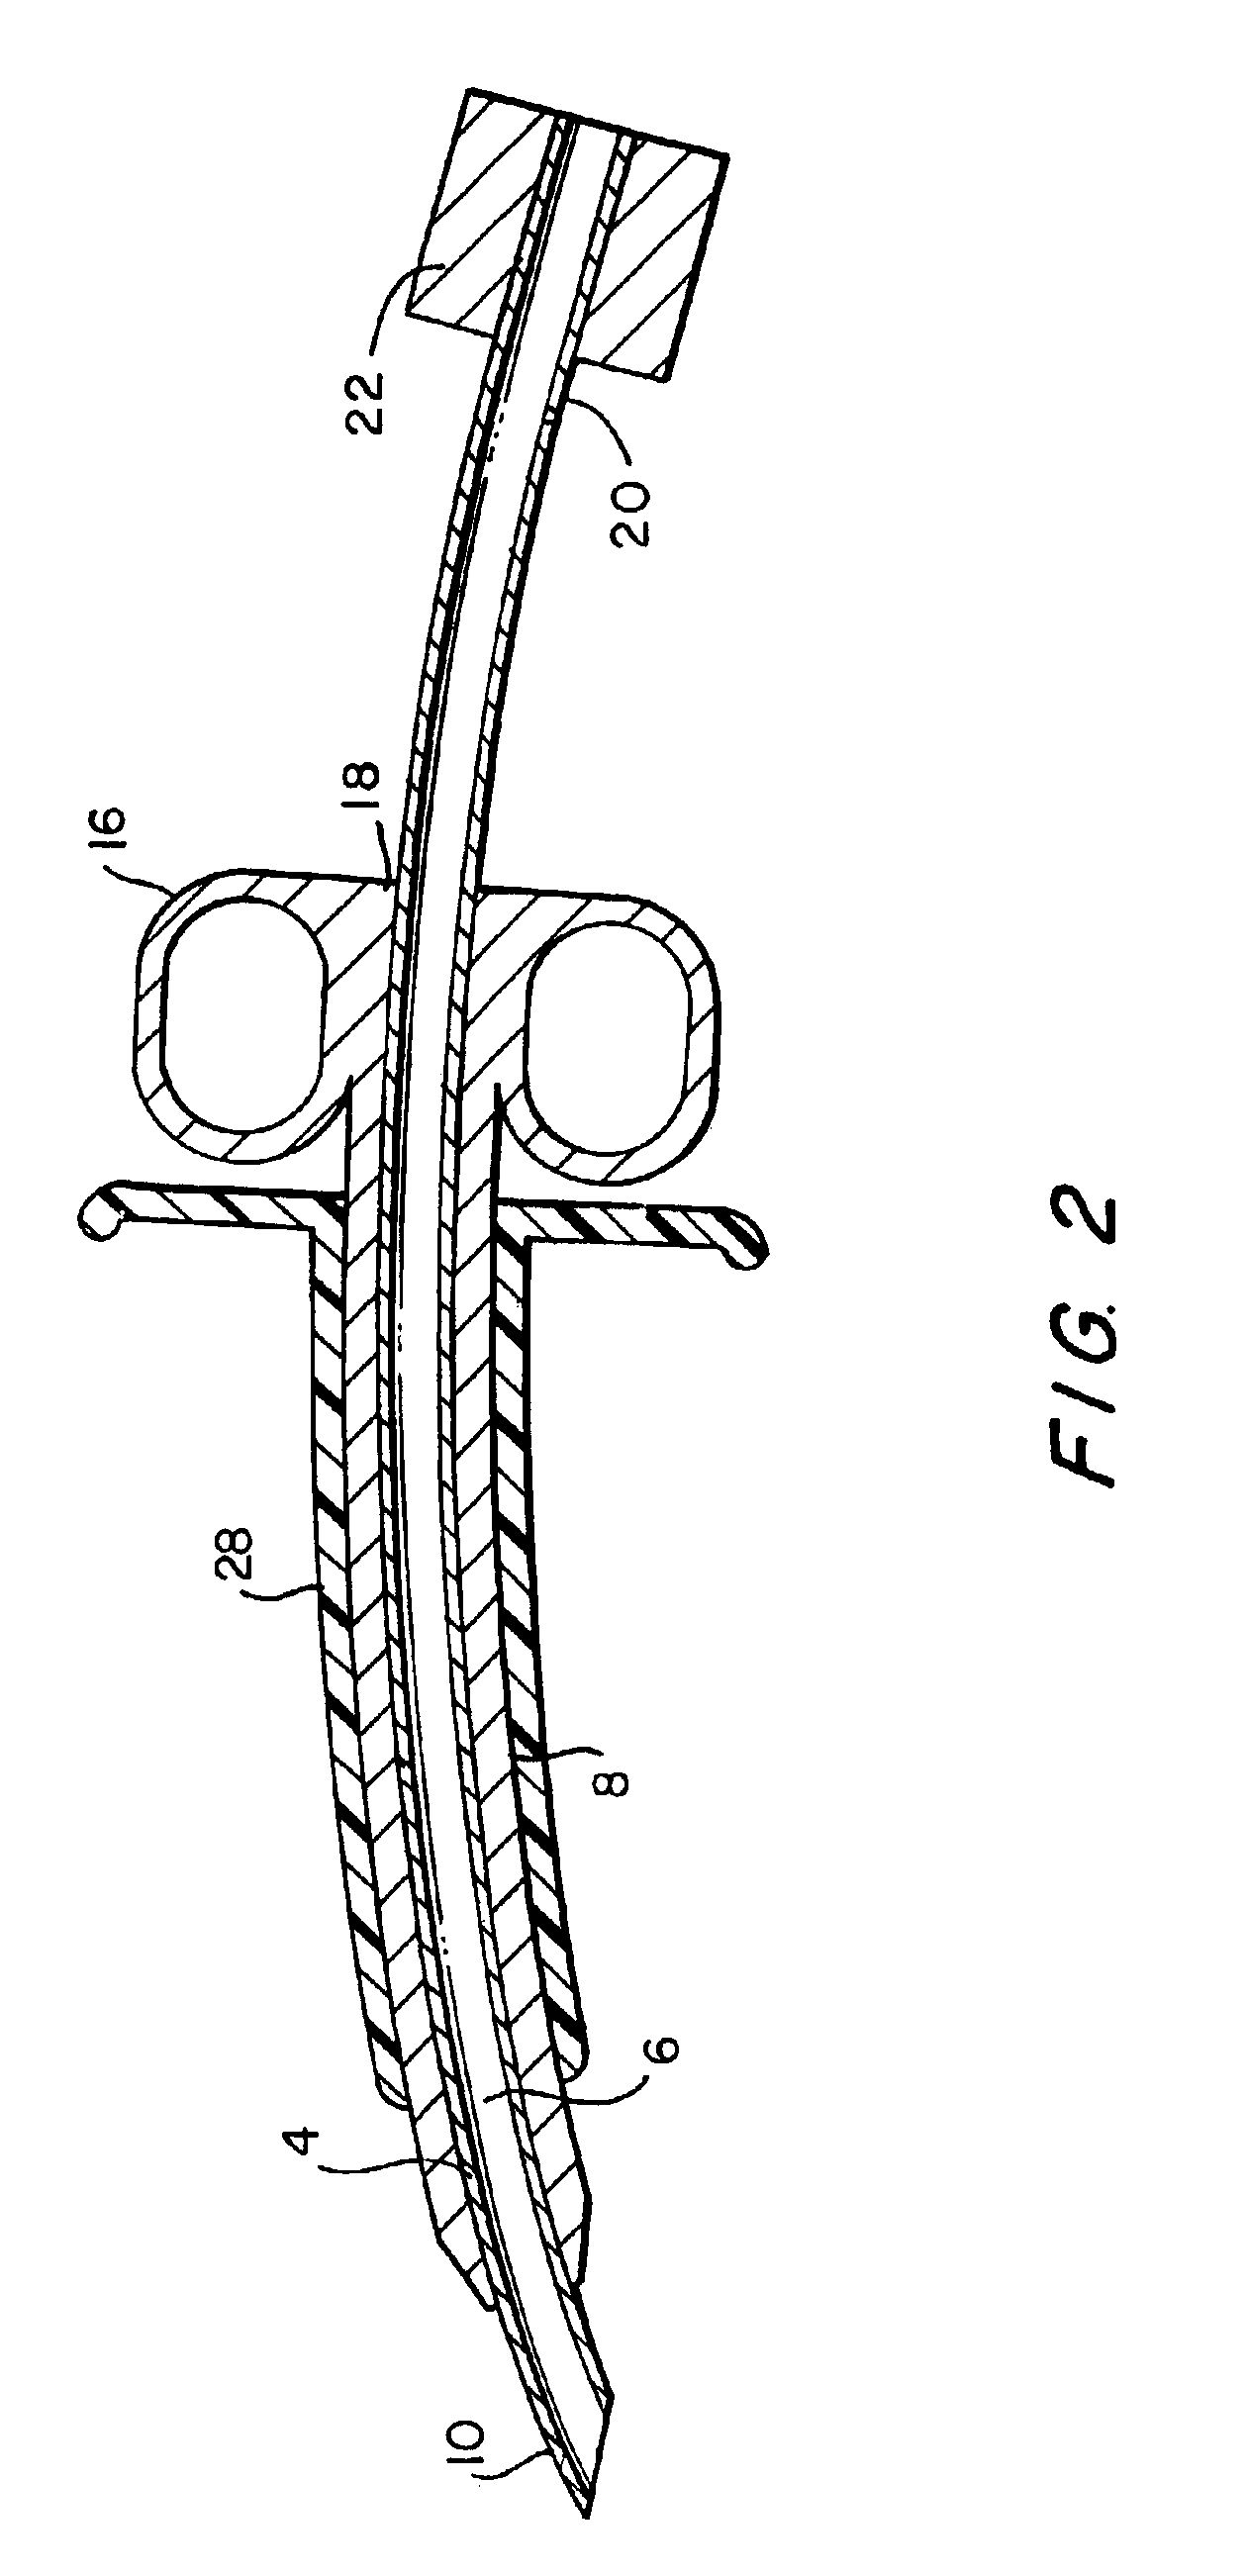 Tunneler-needle combination for tunneled catheter placement